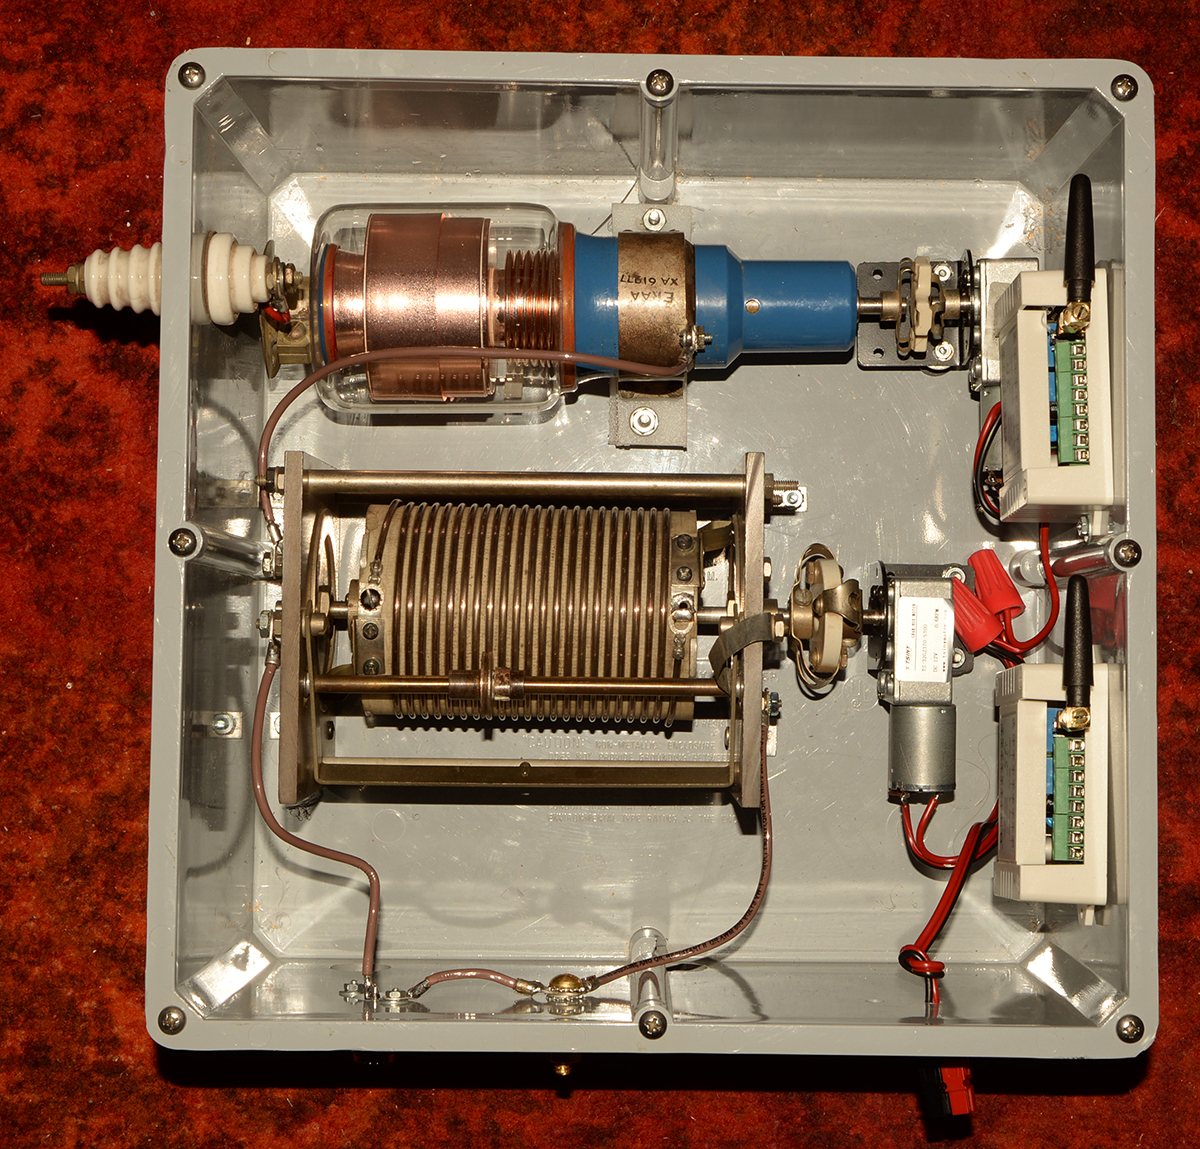 images of an antenna tuner